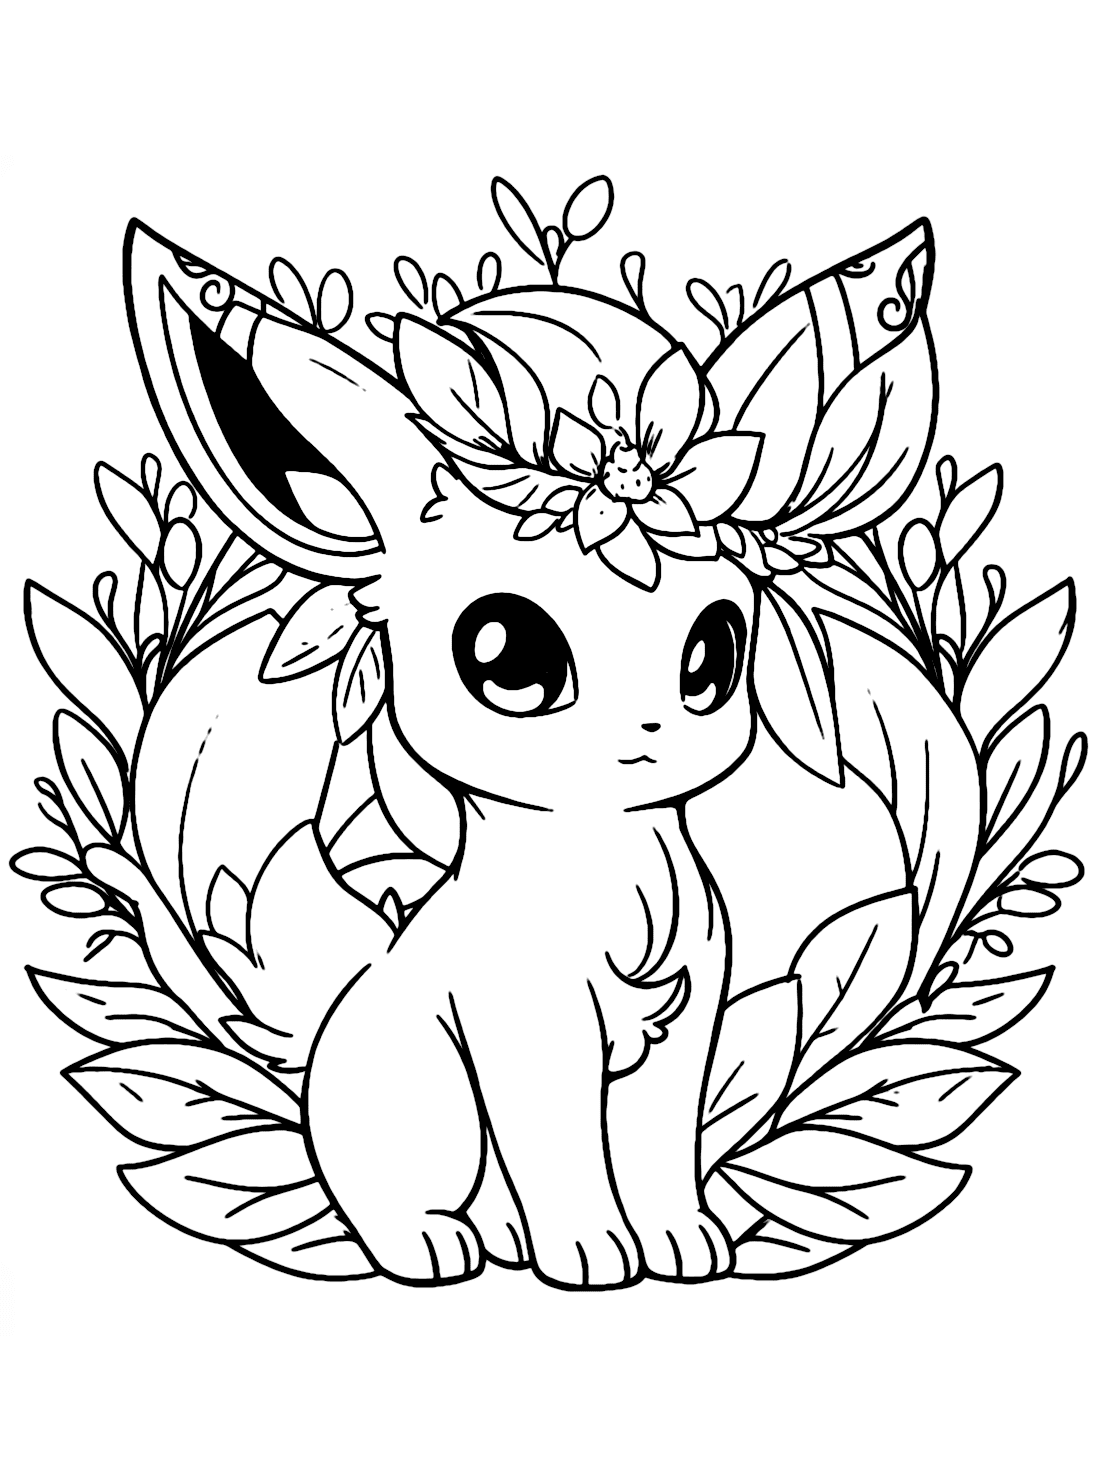 Glaceon Leafeon Coloring Page